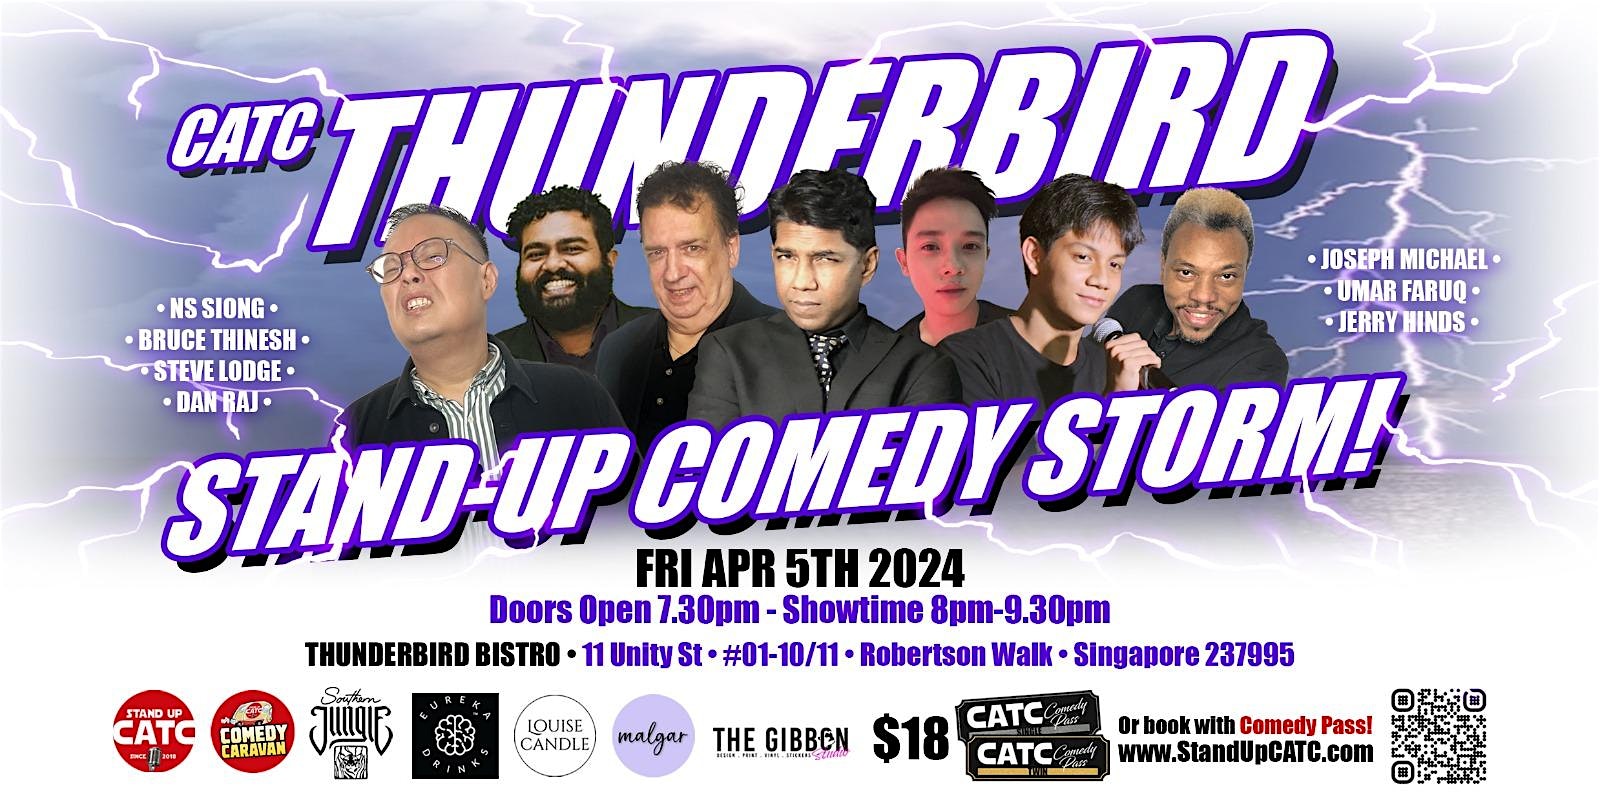 Thunderbird Stand-Up Comedy Storm!